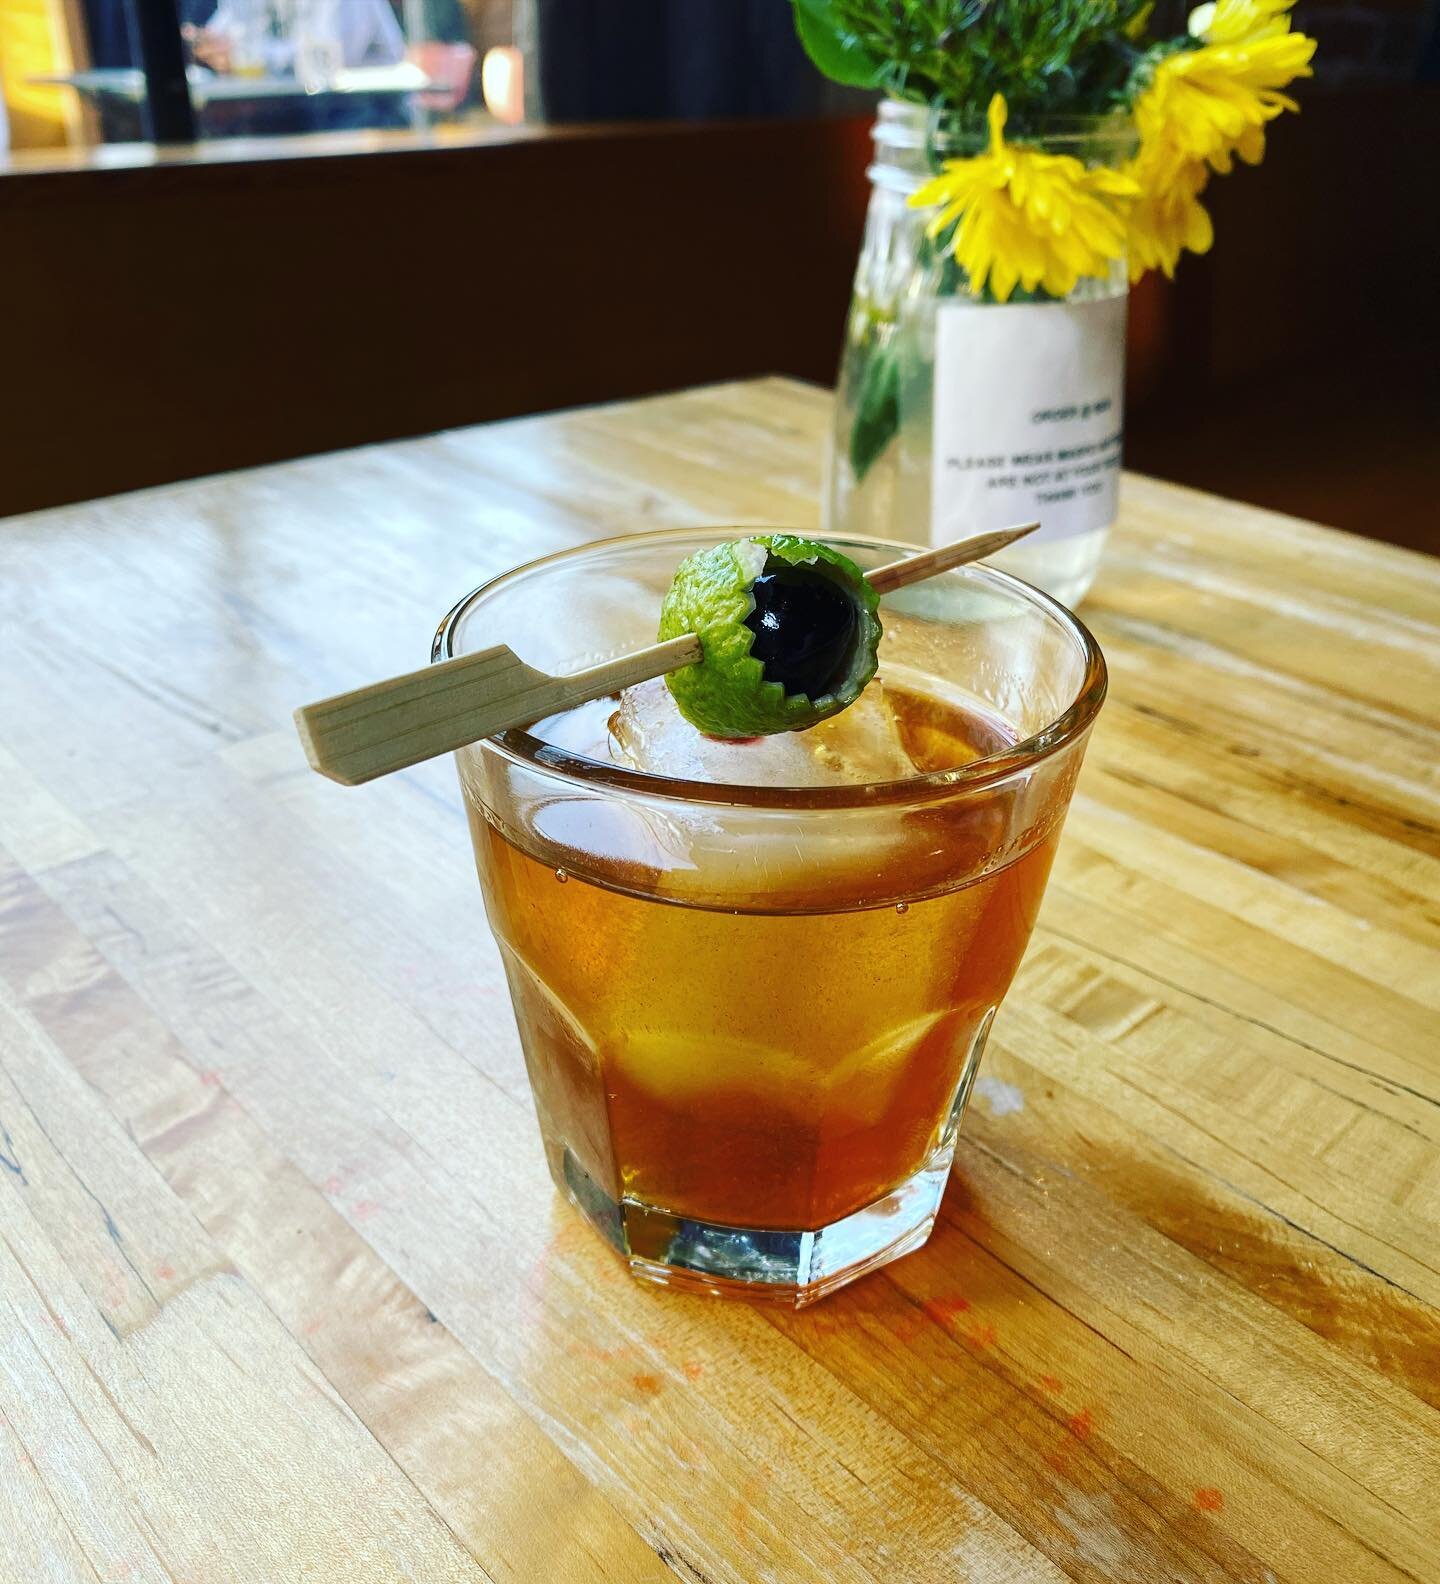 👋 time for another cocktail naming contest! best name gets this drink for free. winner will be announced tomorrow (Sunday). *instagram only*

the essentials: 
- rancho alegre tequila
- cinnamon + date simple syrup
- @cynarusa 70 💪🏻
- house made or